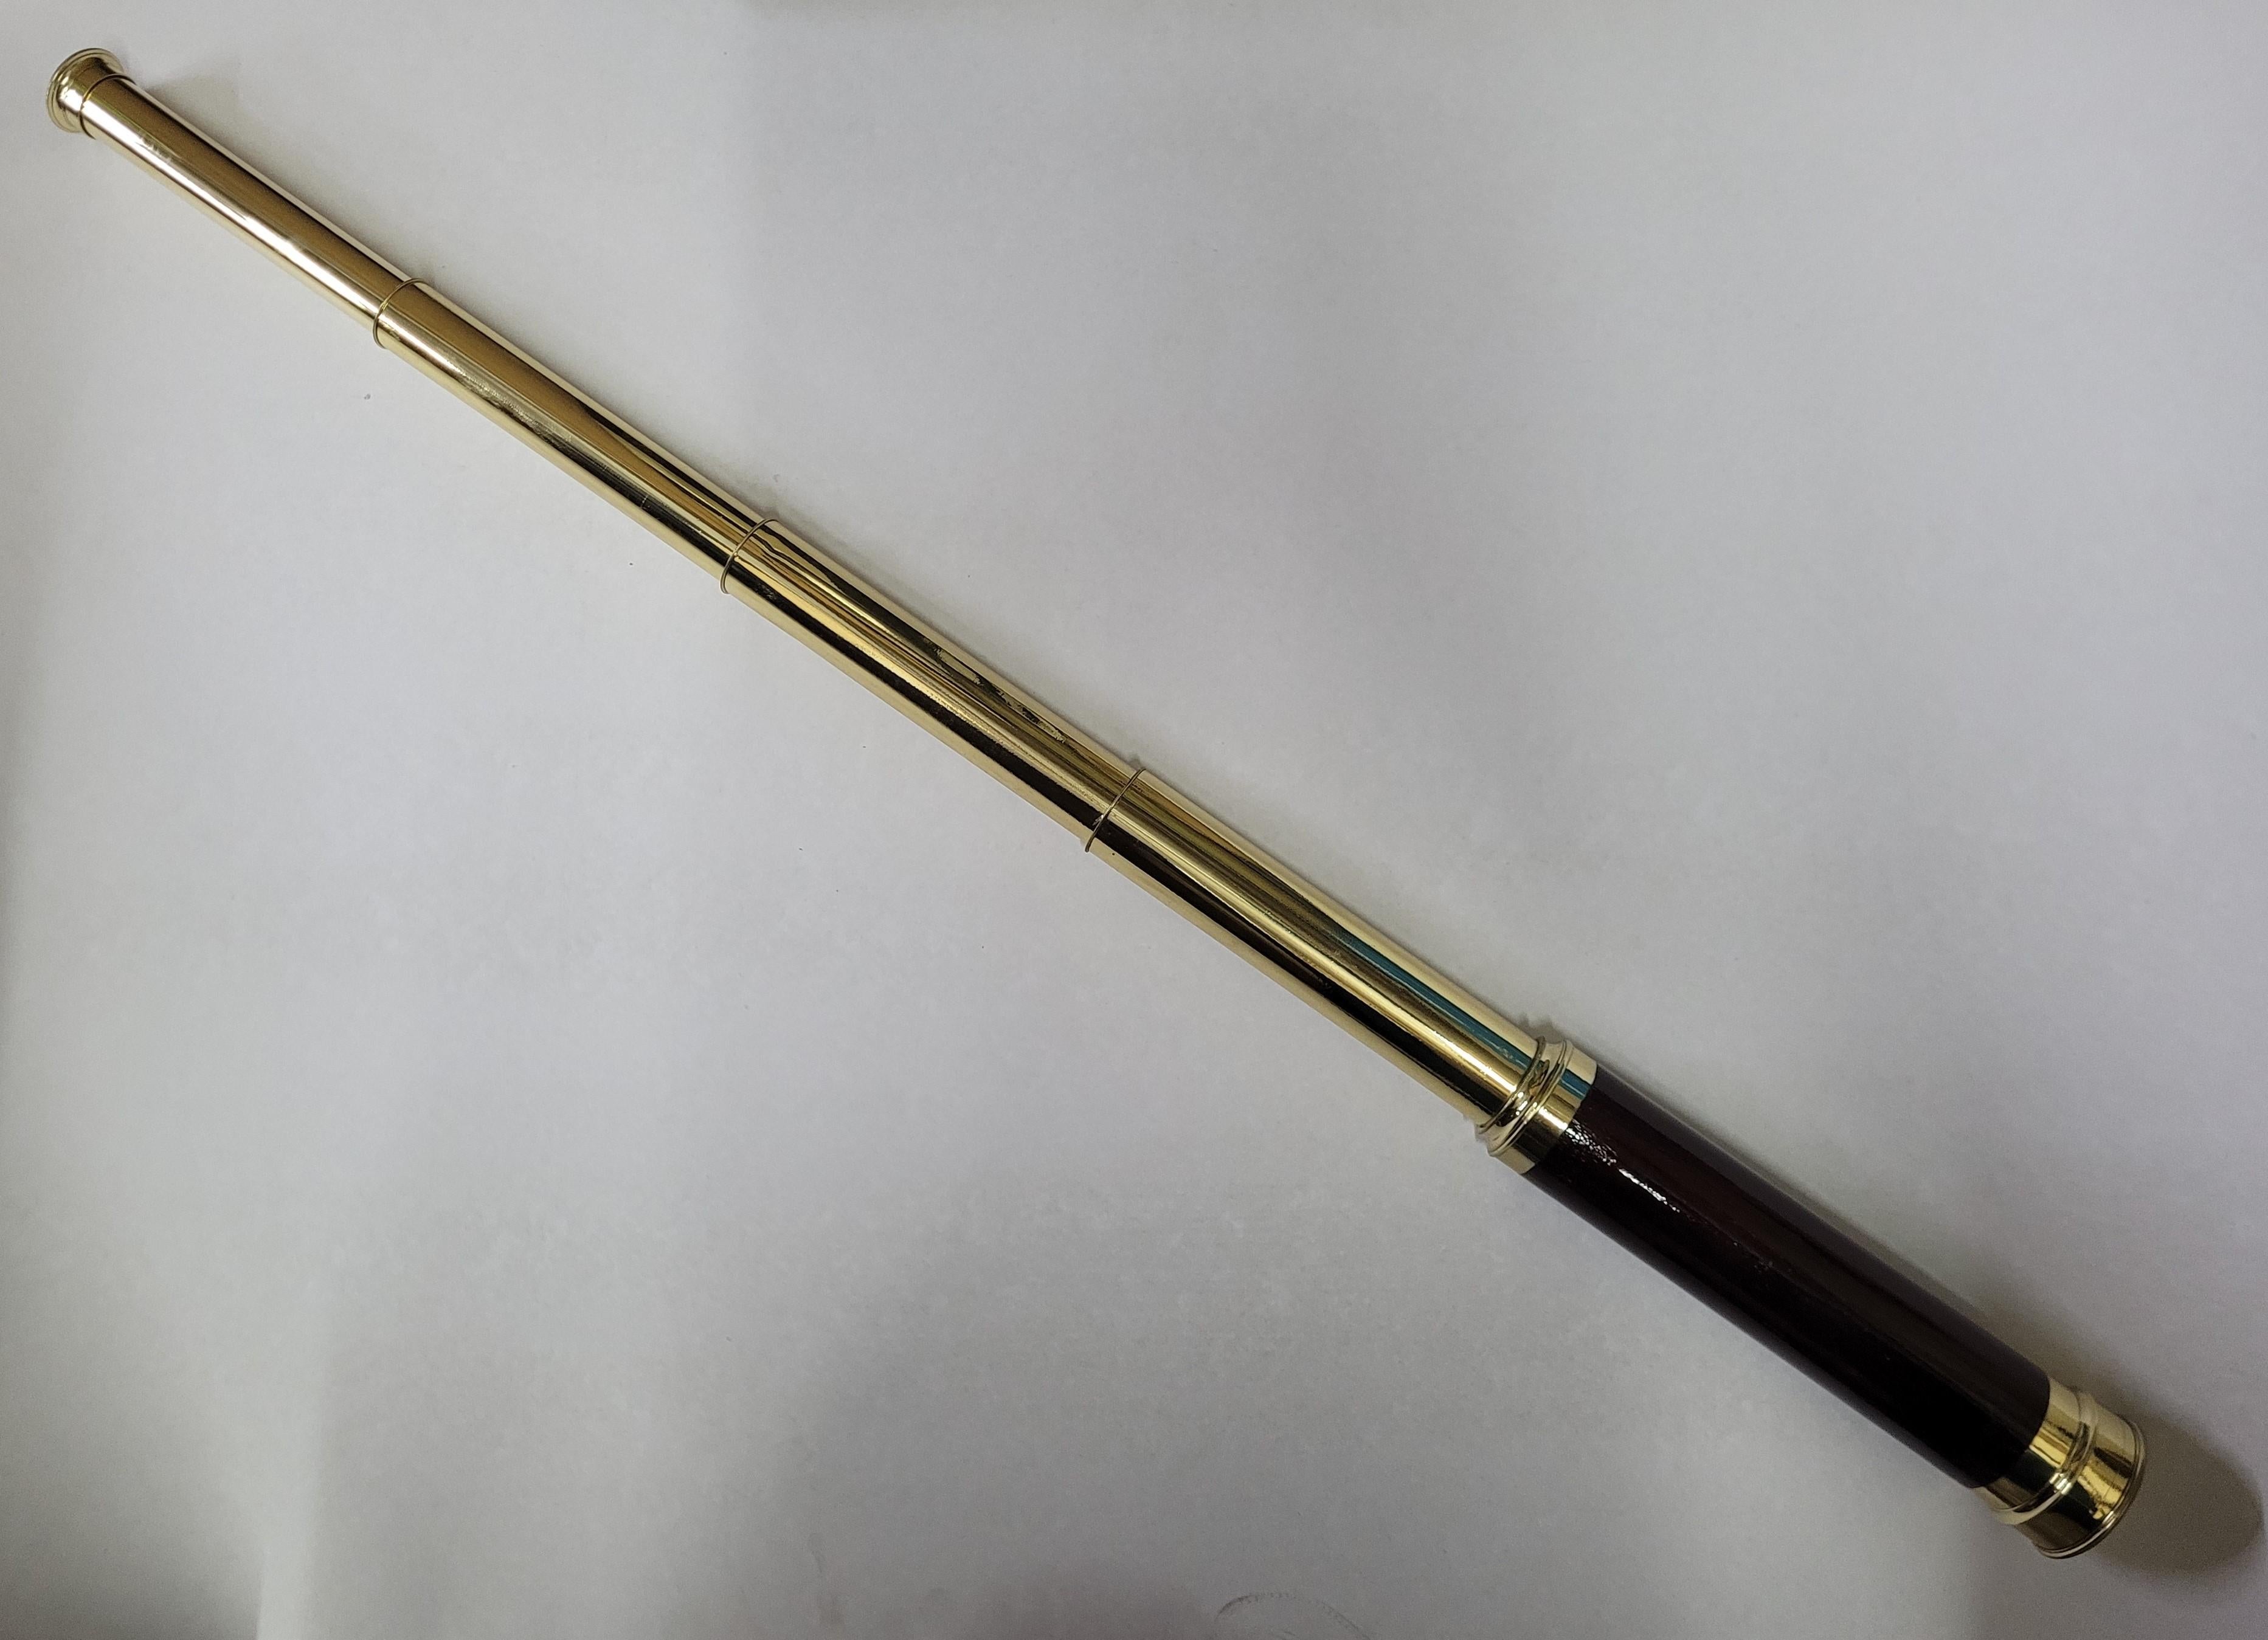 Ships spyglass telescope appropriate for use on a yacht, ship, or anywhere with a view. This has been meticulously polished and lacquered. We just restored a great collection of these. This fine instrument has a four draw barrel. The focal tube has